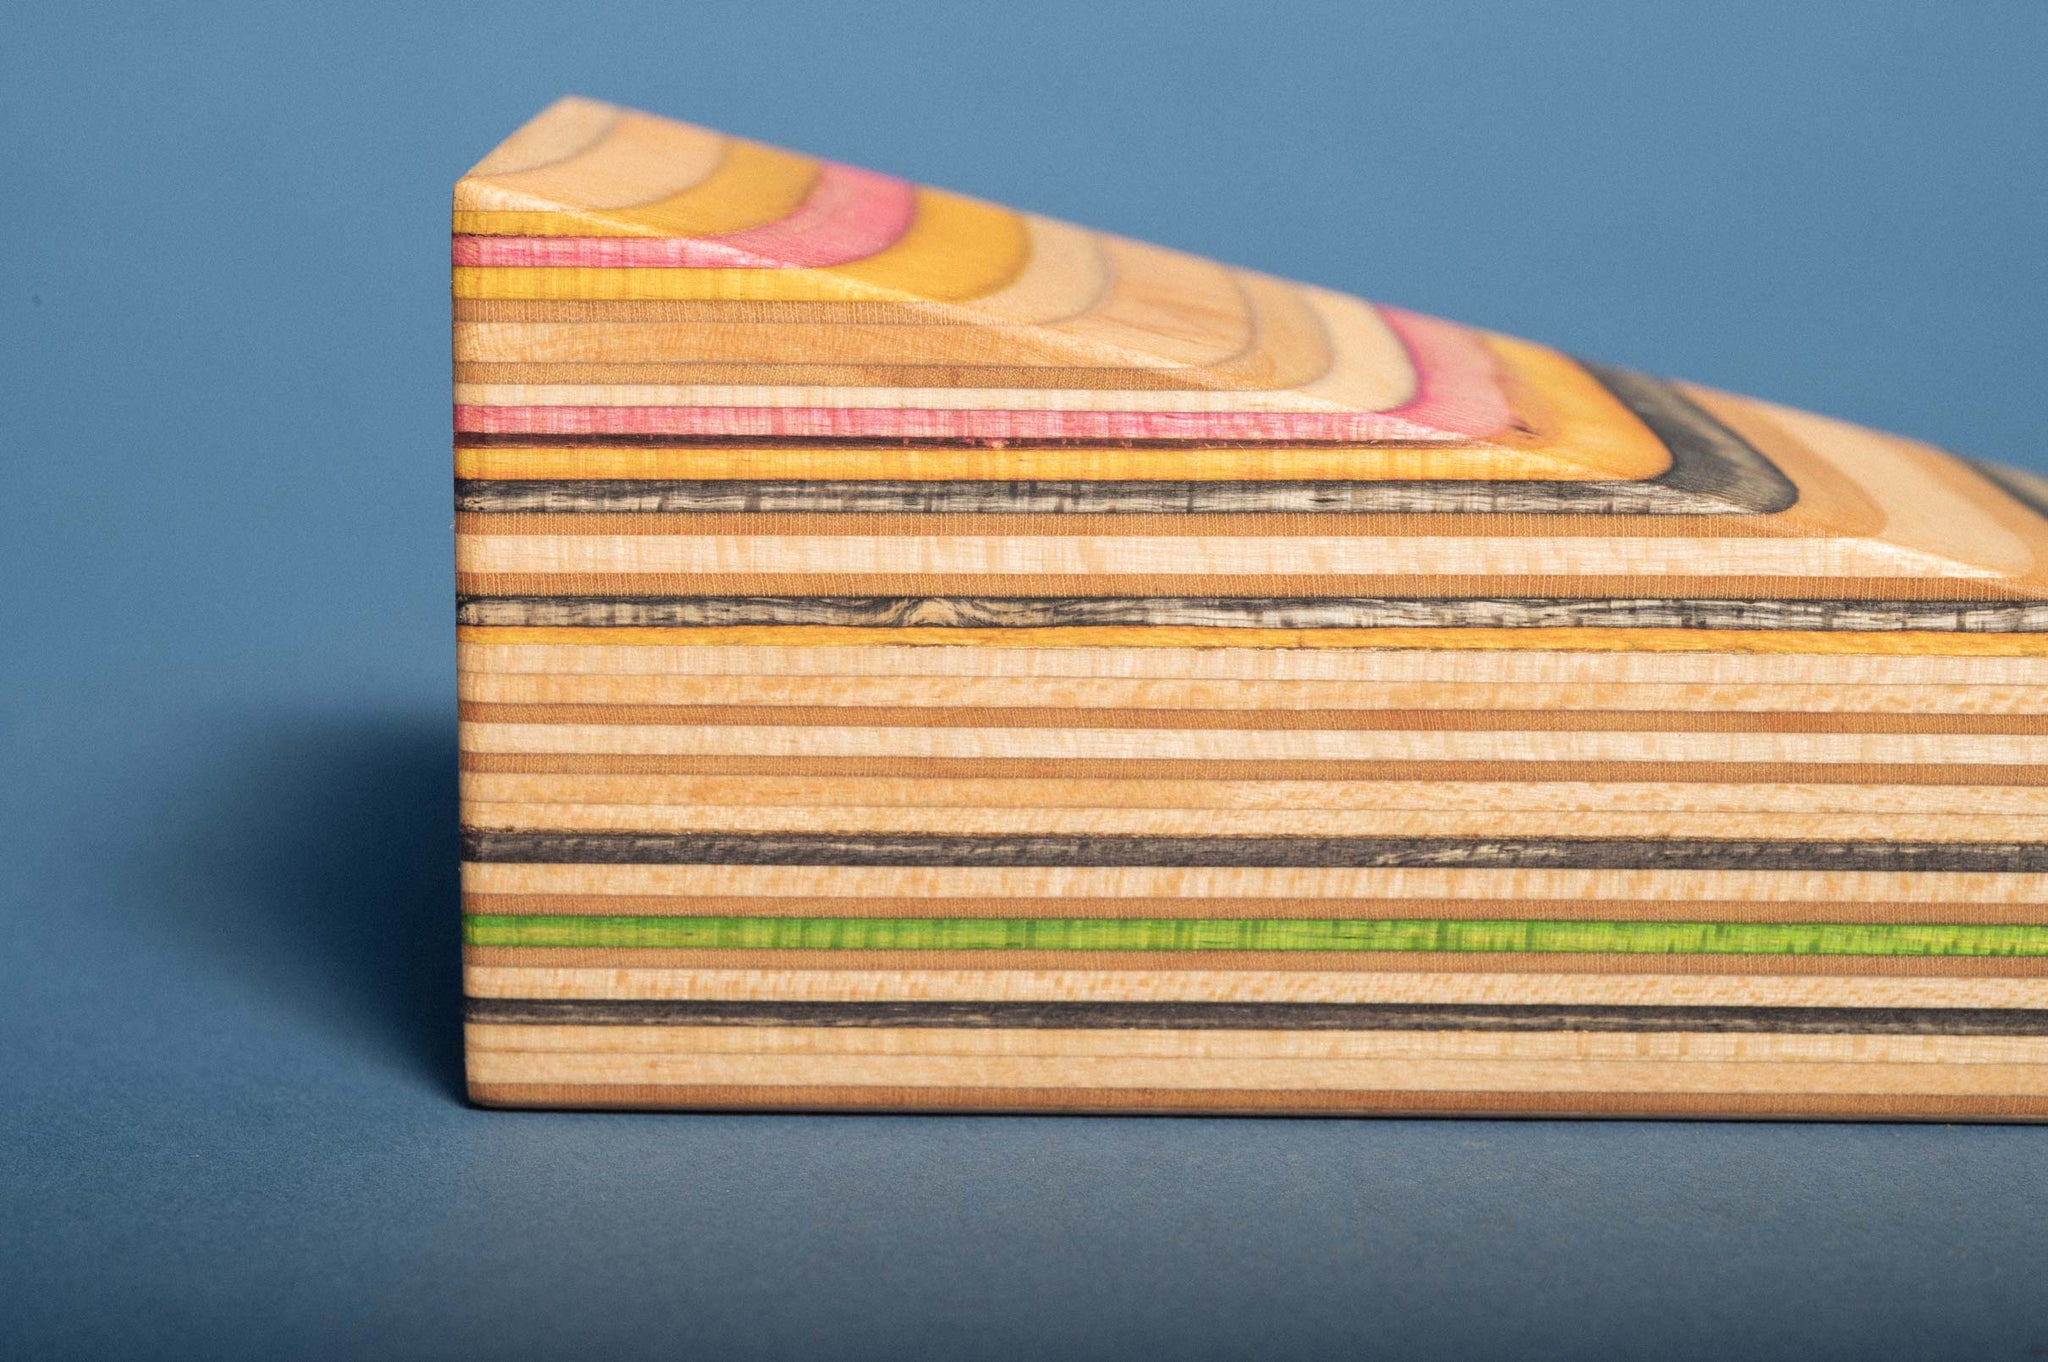 Close-up of the Door Stop, showing the multicolored layers of recycled skateboard wood